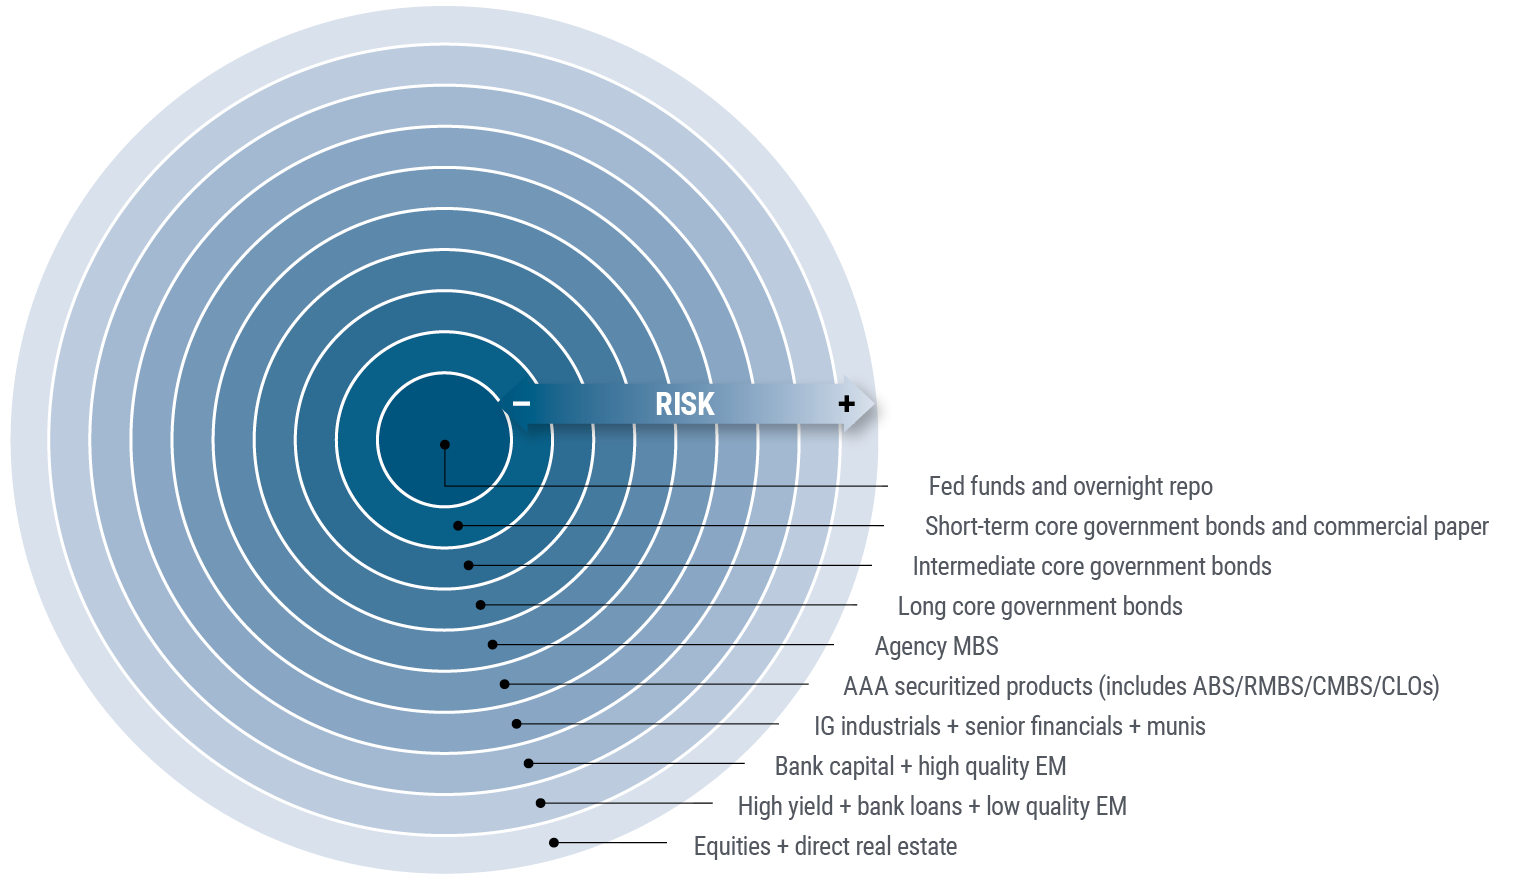 Figure 1 depicts PIMCO’s concept of concentric circles, which places the least risky, most liquid asset classes at the center, including overnight repurchase (repo) rates, commercial paper, and ultra-short and short-term bonds, then expanding to somewhat riskier assets including longer-term sovereign bonds, mortgage-backed securities, and investment grade corporates, and populating the outer rings with less liquid, higher-risk assets, such as high yield corporates, emerging market investments, equities, and real estate.